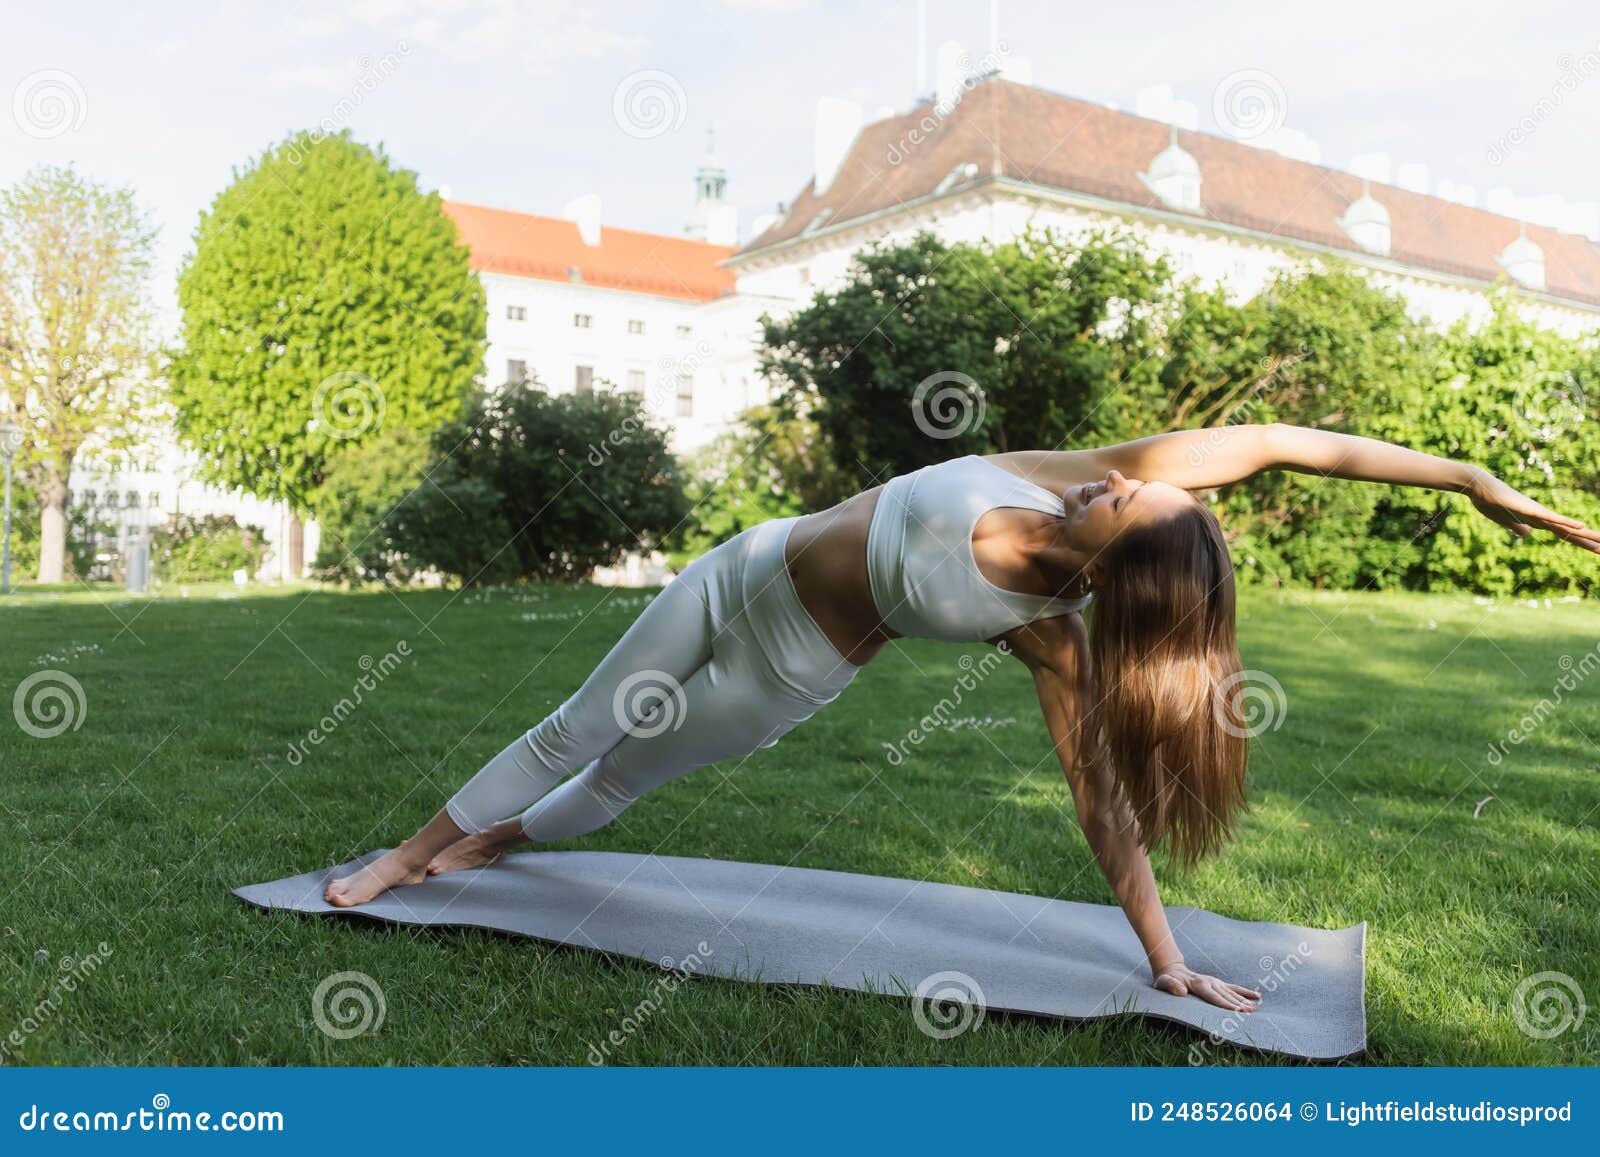 Full Length of Slim Woman Practicing Stock Photo - Image of